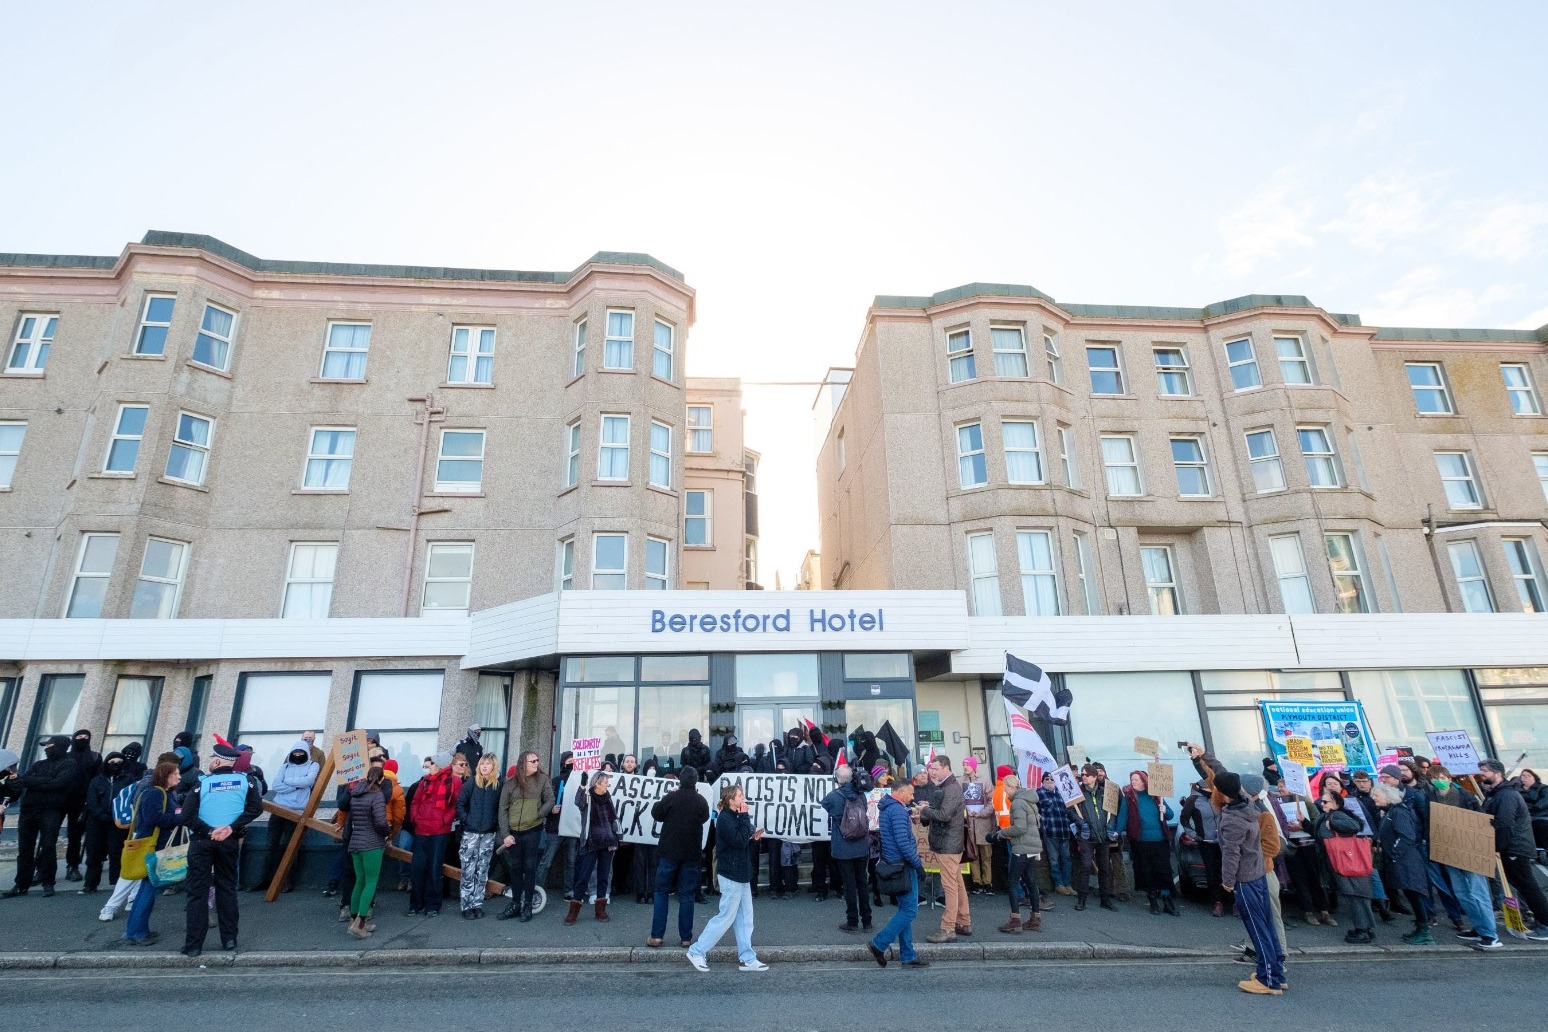 Hundreds attend asylum seeker hotel protests and counter demonstration 